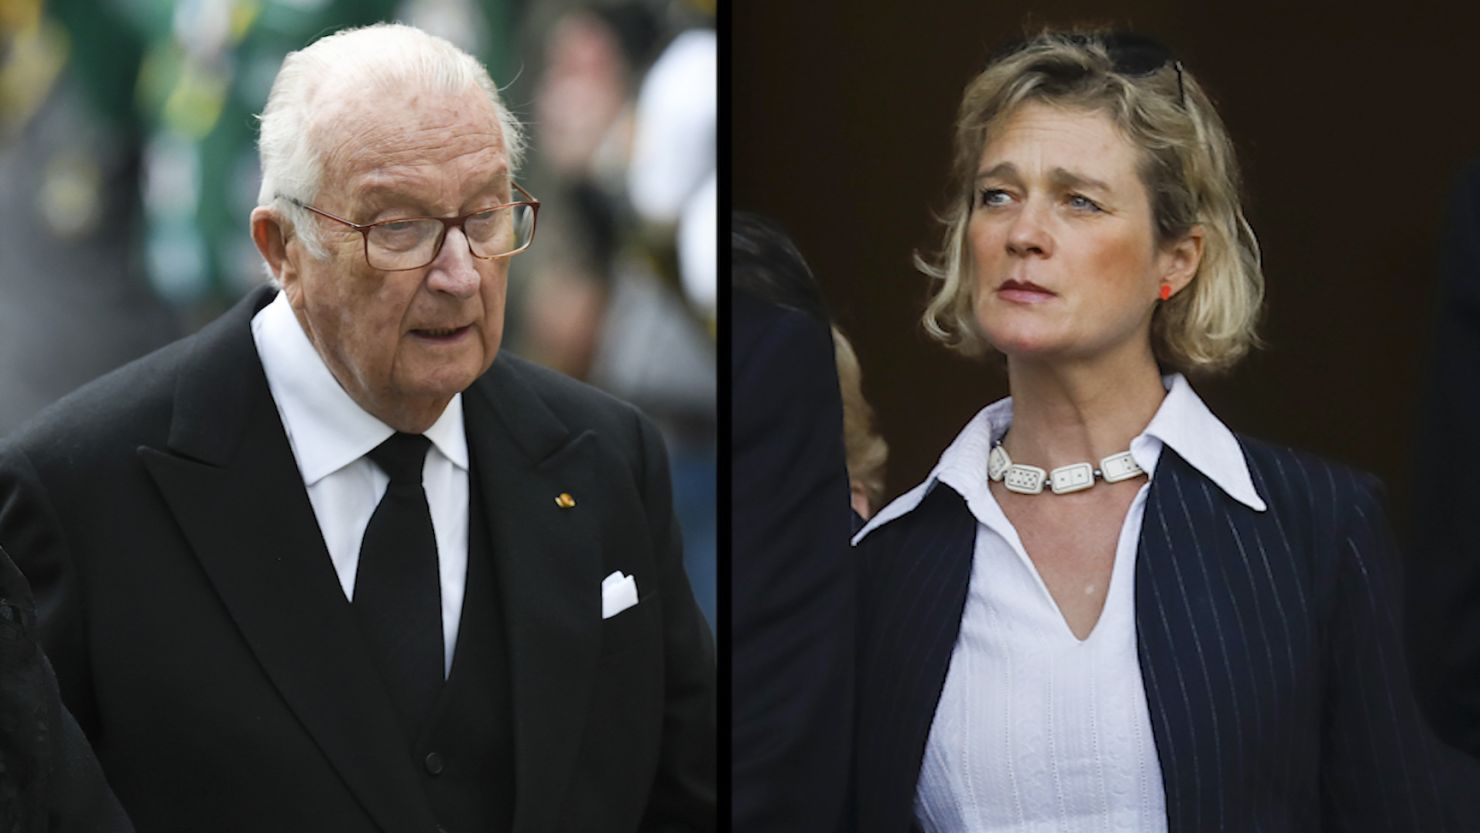 Delphine of Saxe-Cobourg legally proved that Belgium's former King Albert II is her father.